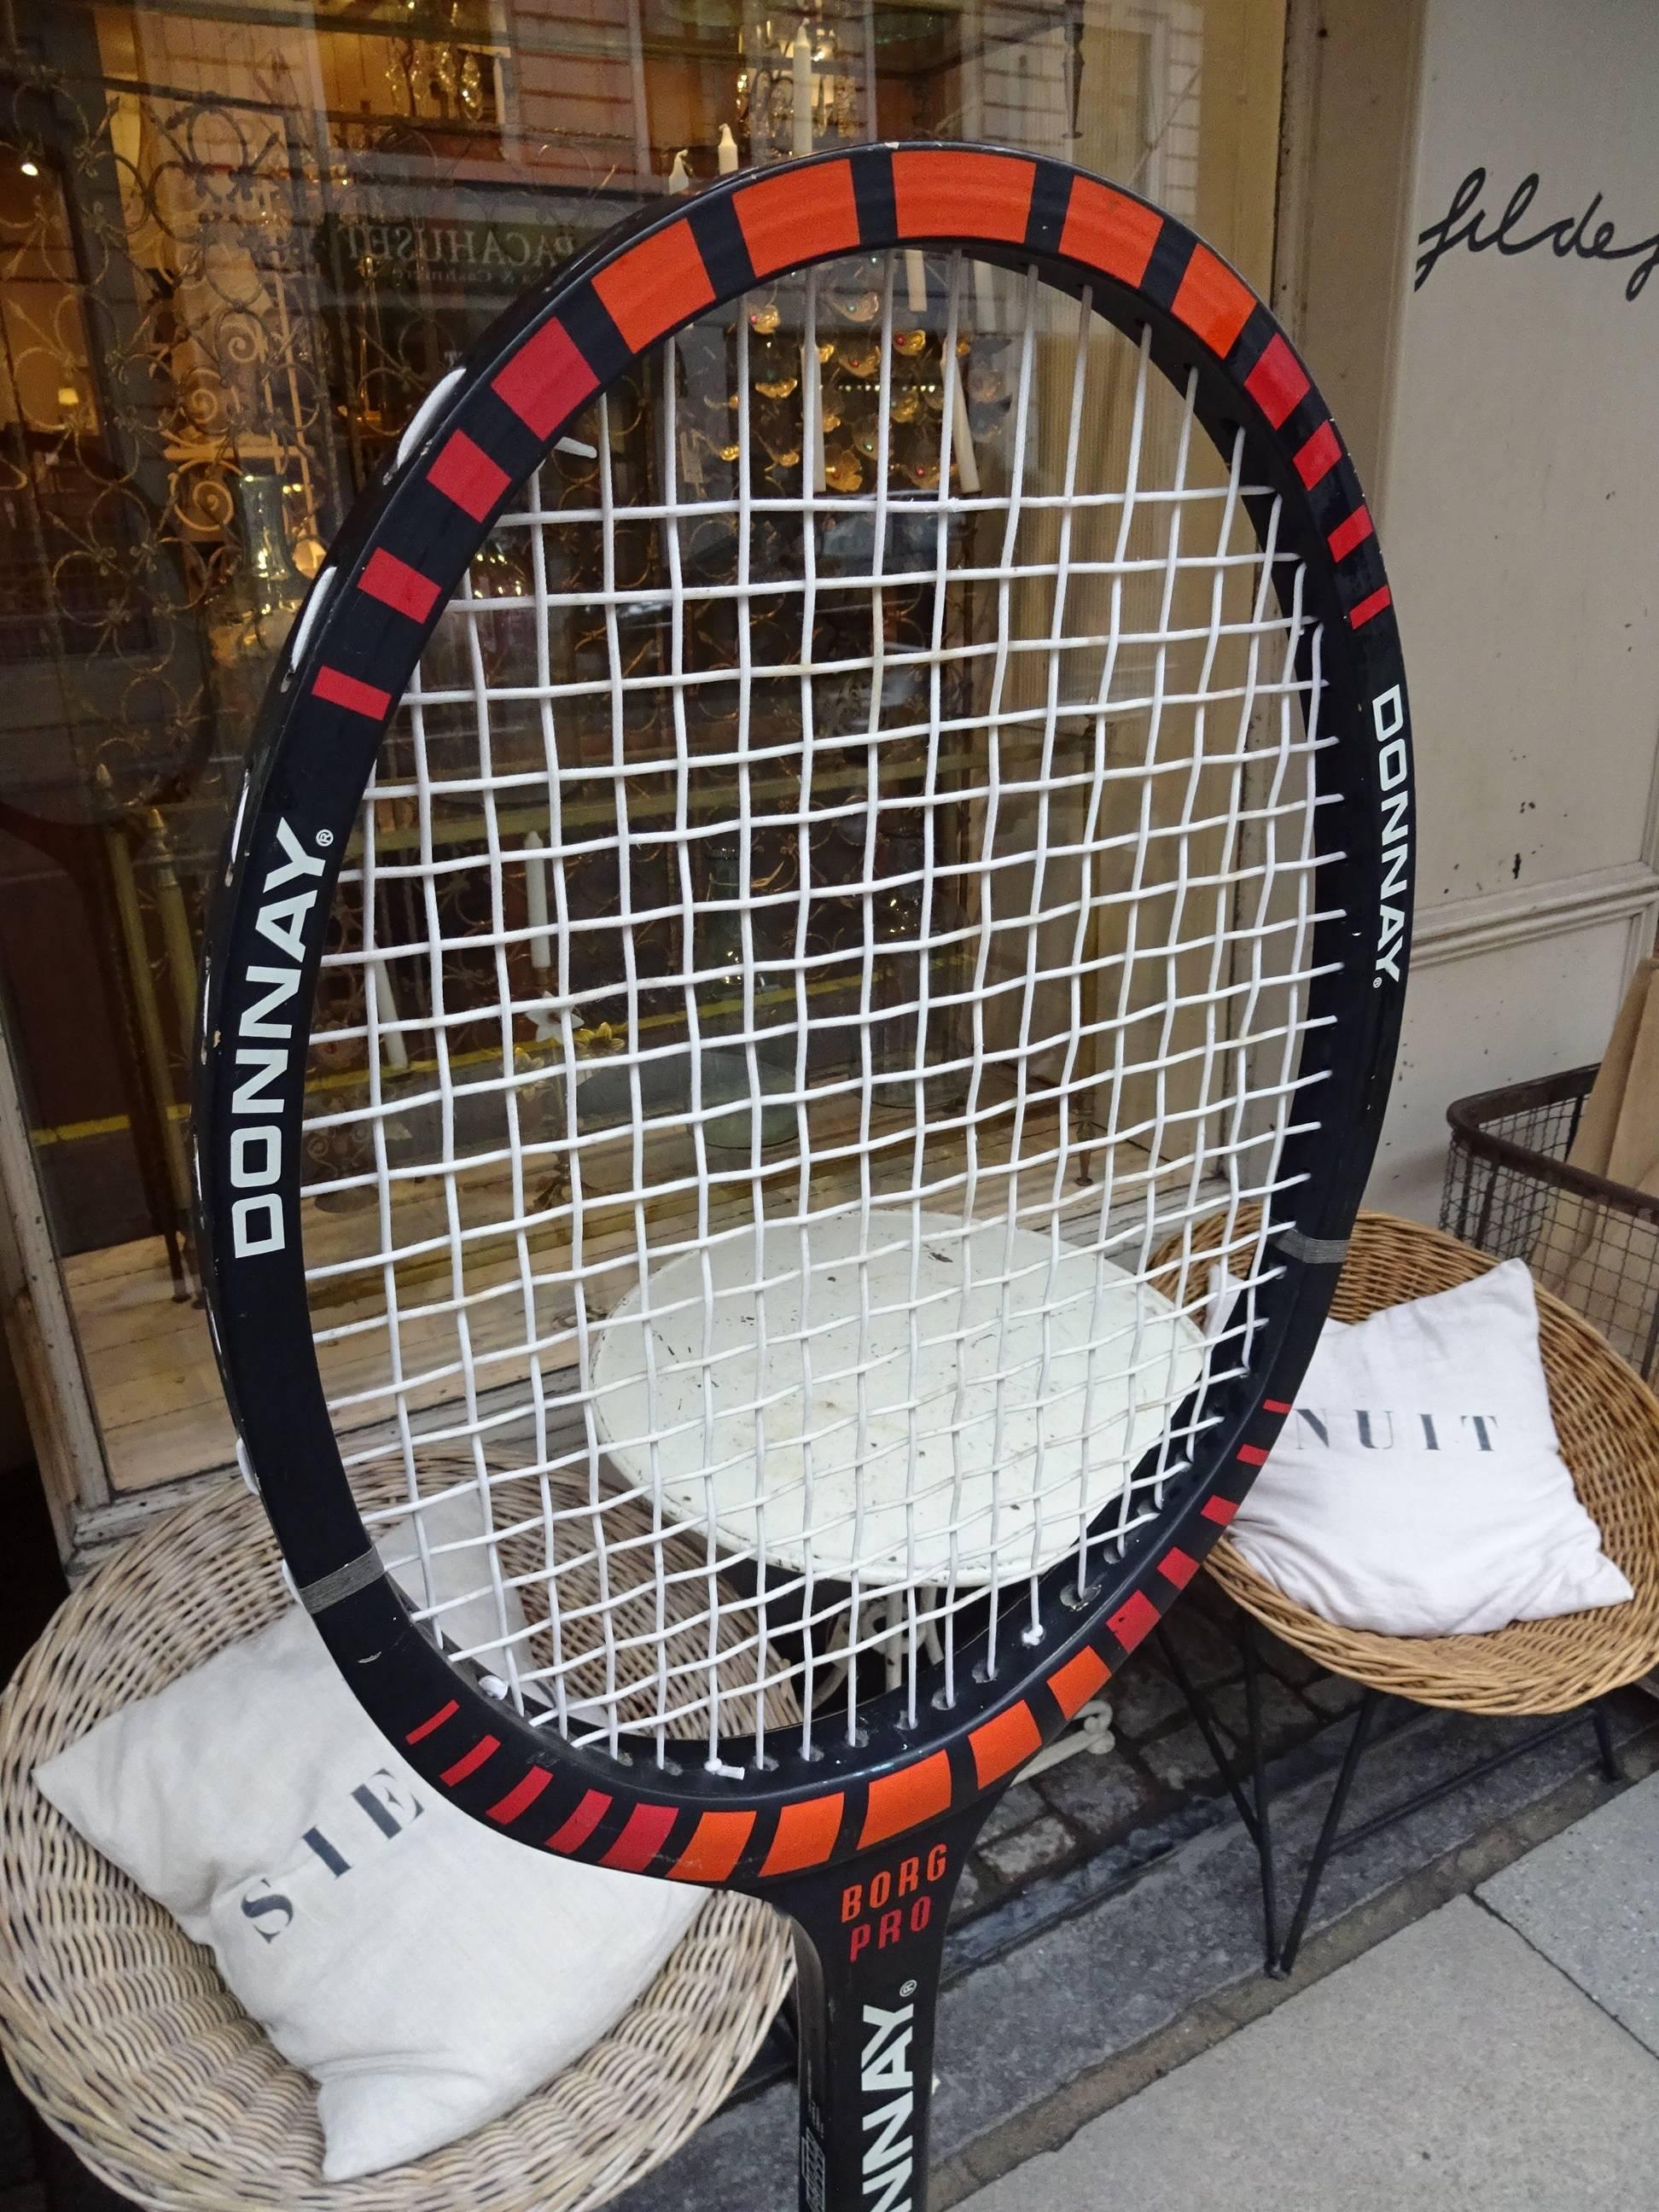 Cool promotional and large Donnay brand racket, known as Borg Pro, used by legendary Swedish Bjorn Borg in 1970s-1980s. It is with this racket that he won numerous victories at Wimbledon.
   
  